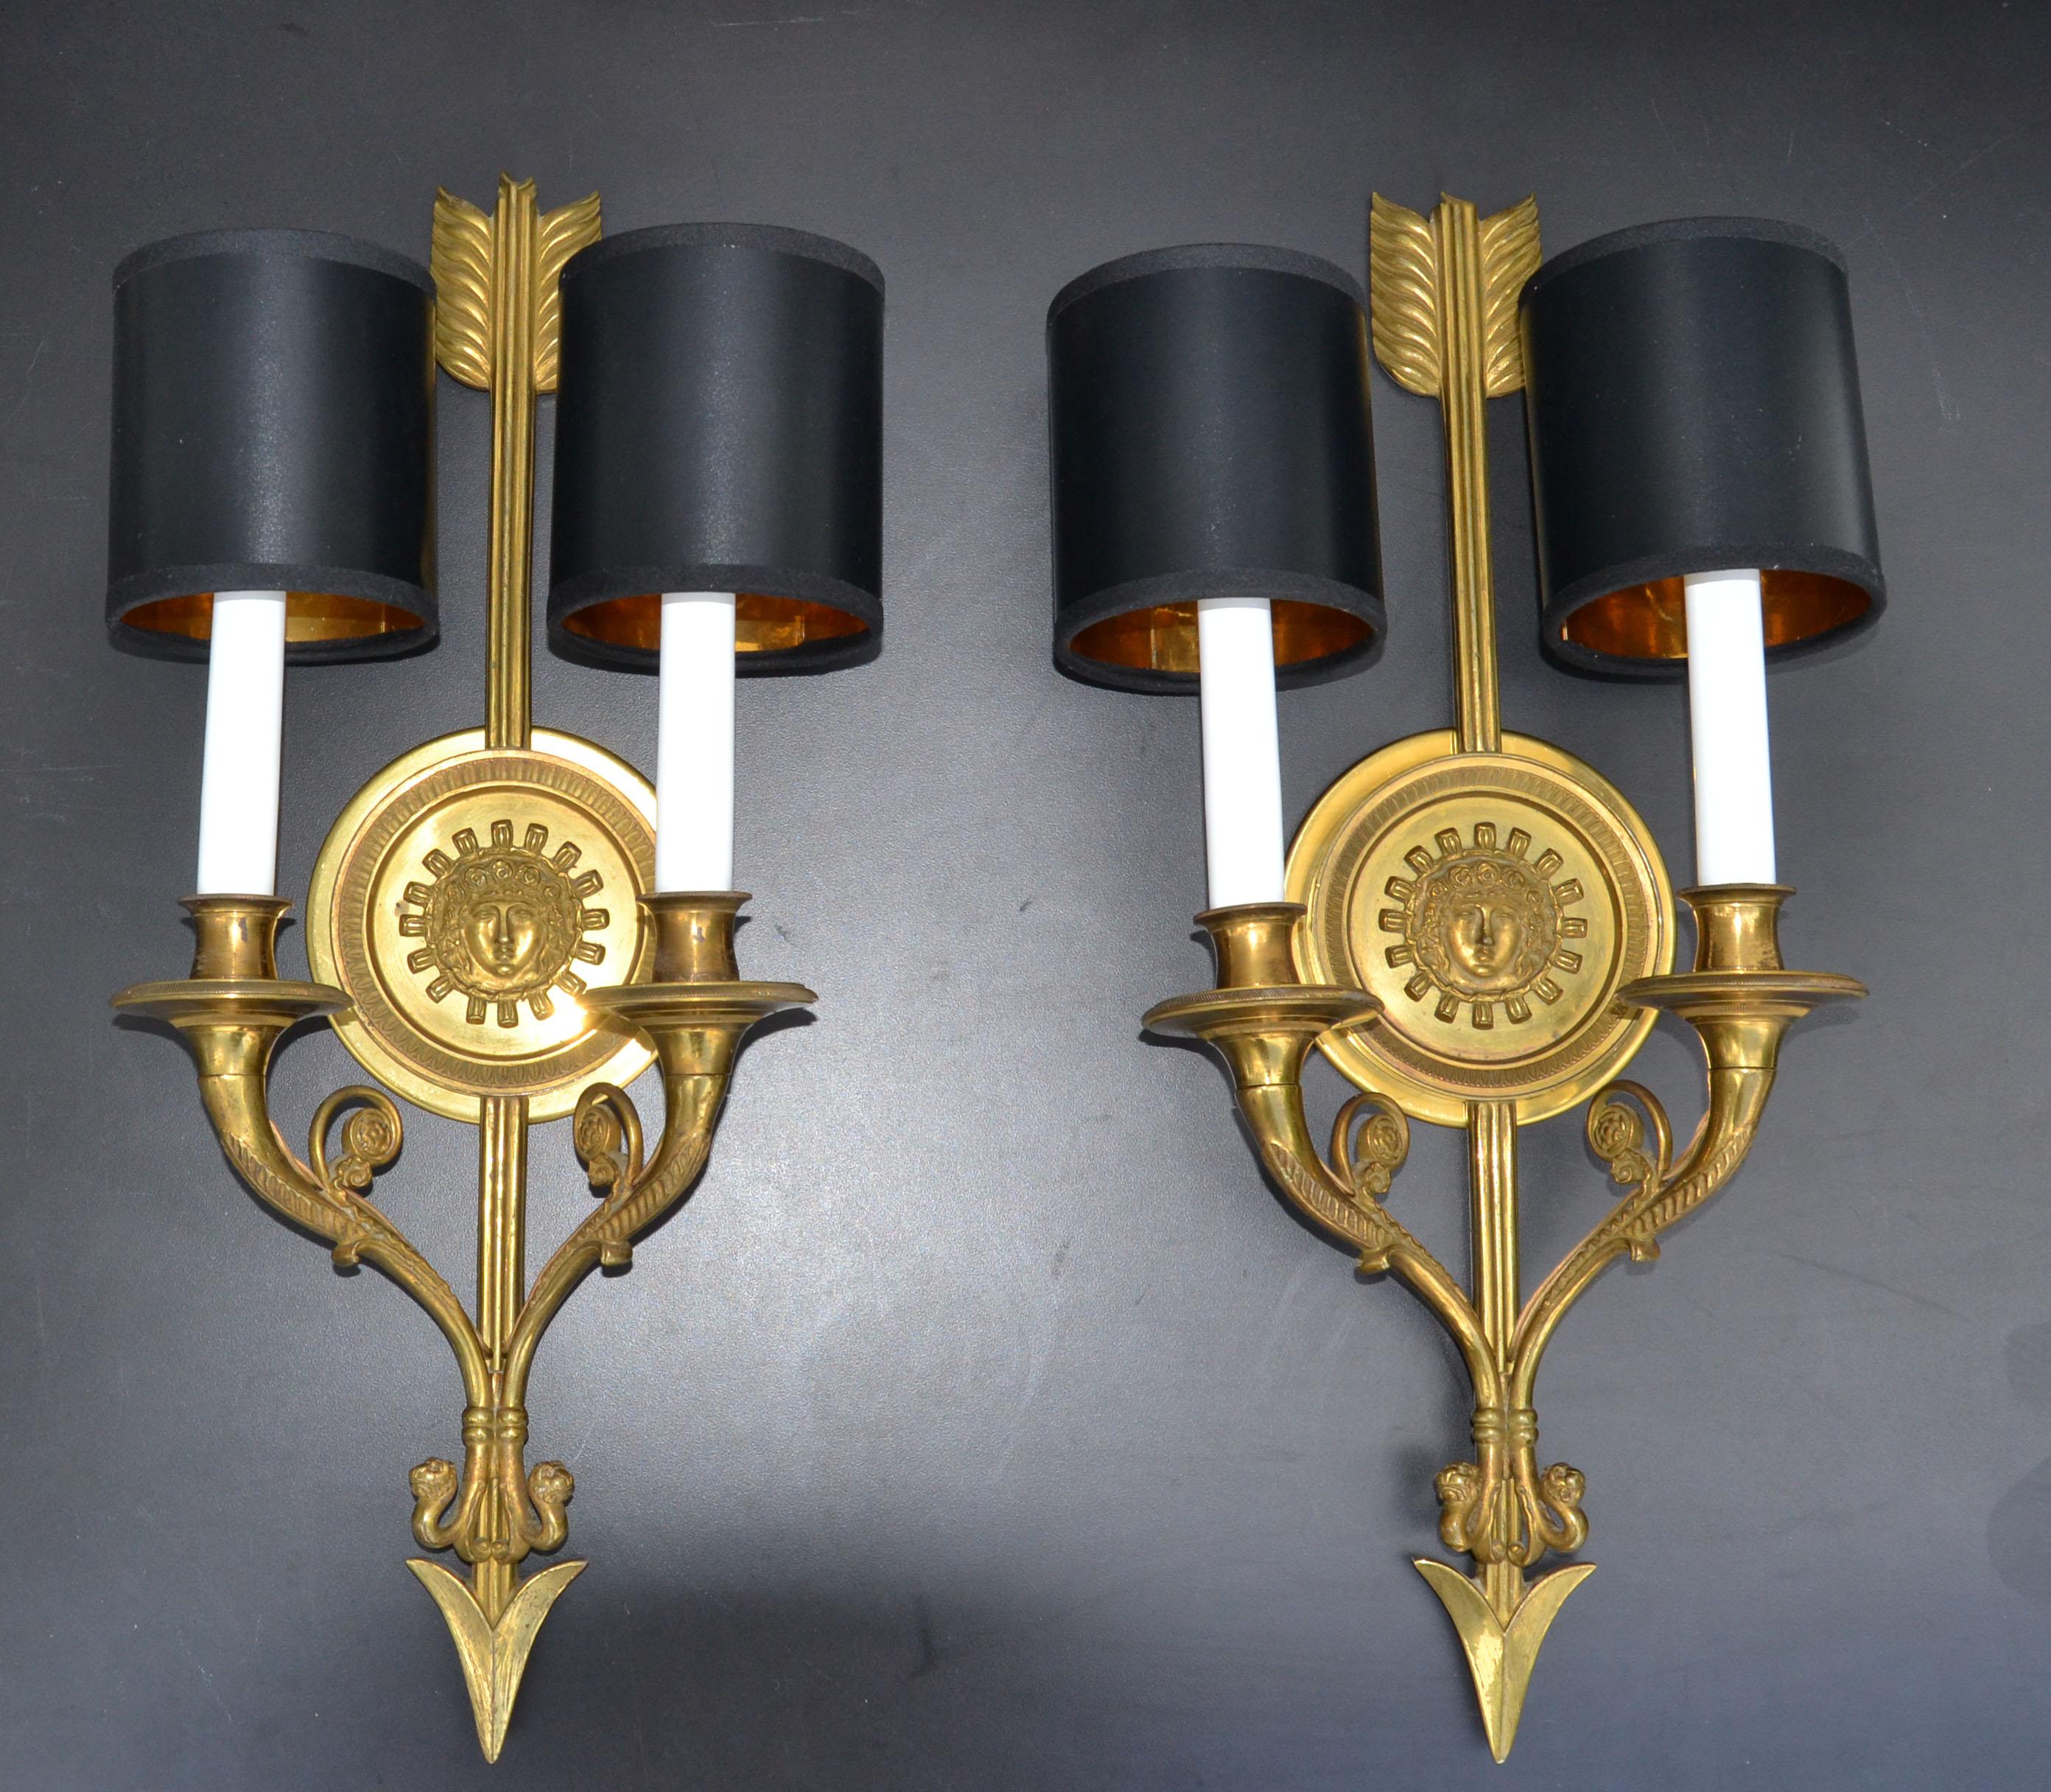 Pair of Andre Arbus Bronze Arrow Sconces 2 Lights, Wall Lamp French Neoclassical For Sale 9